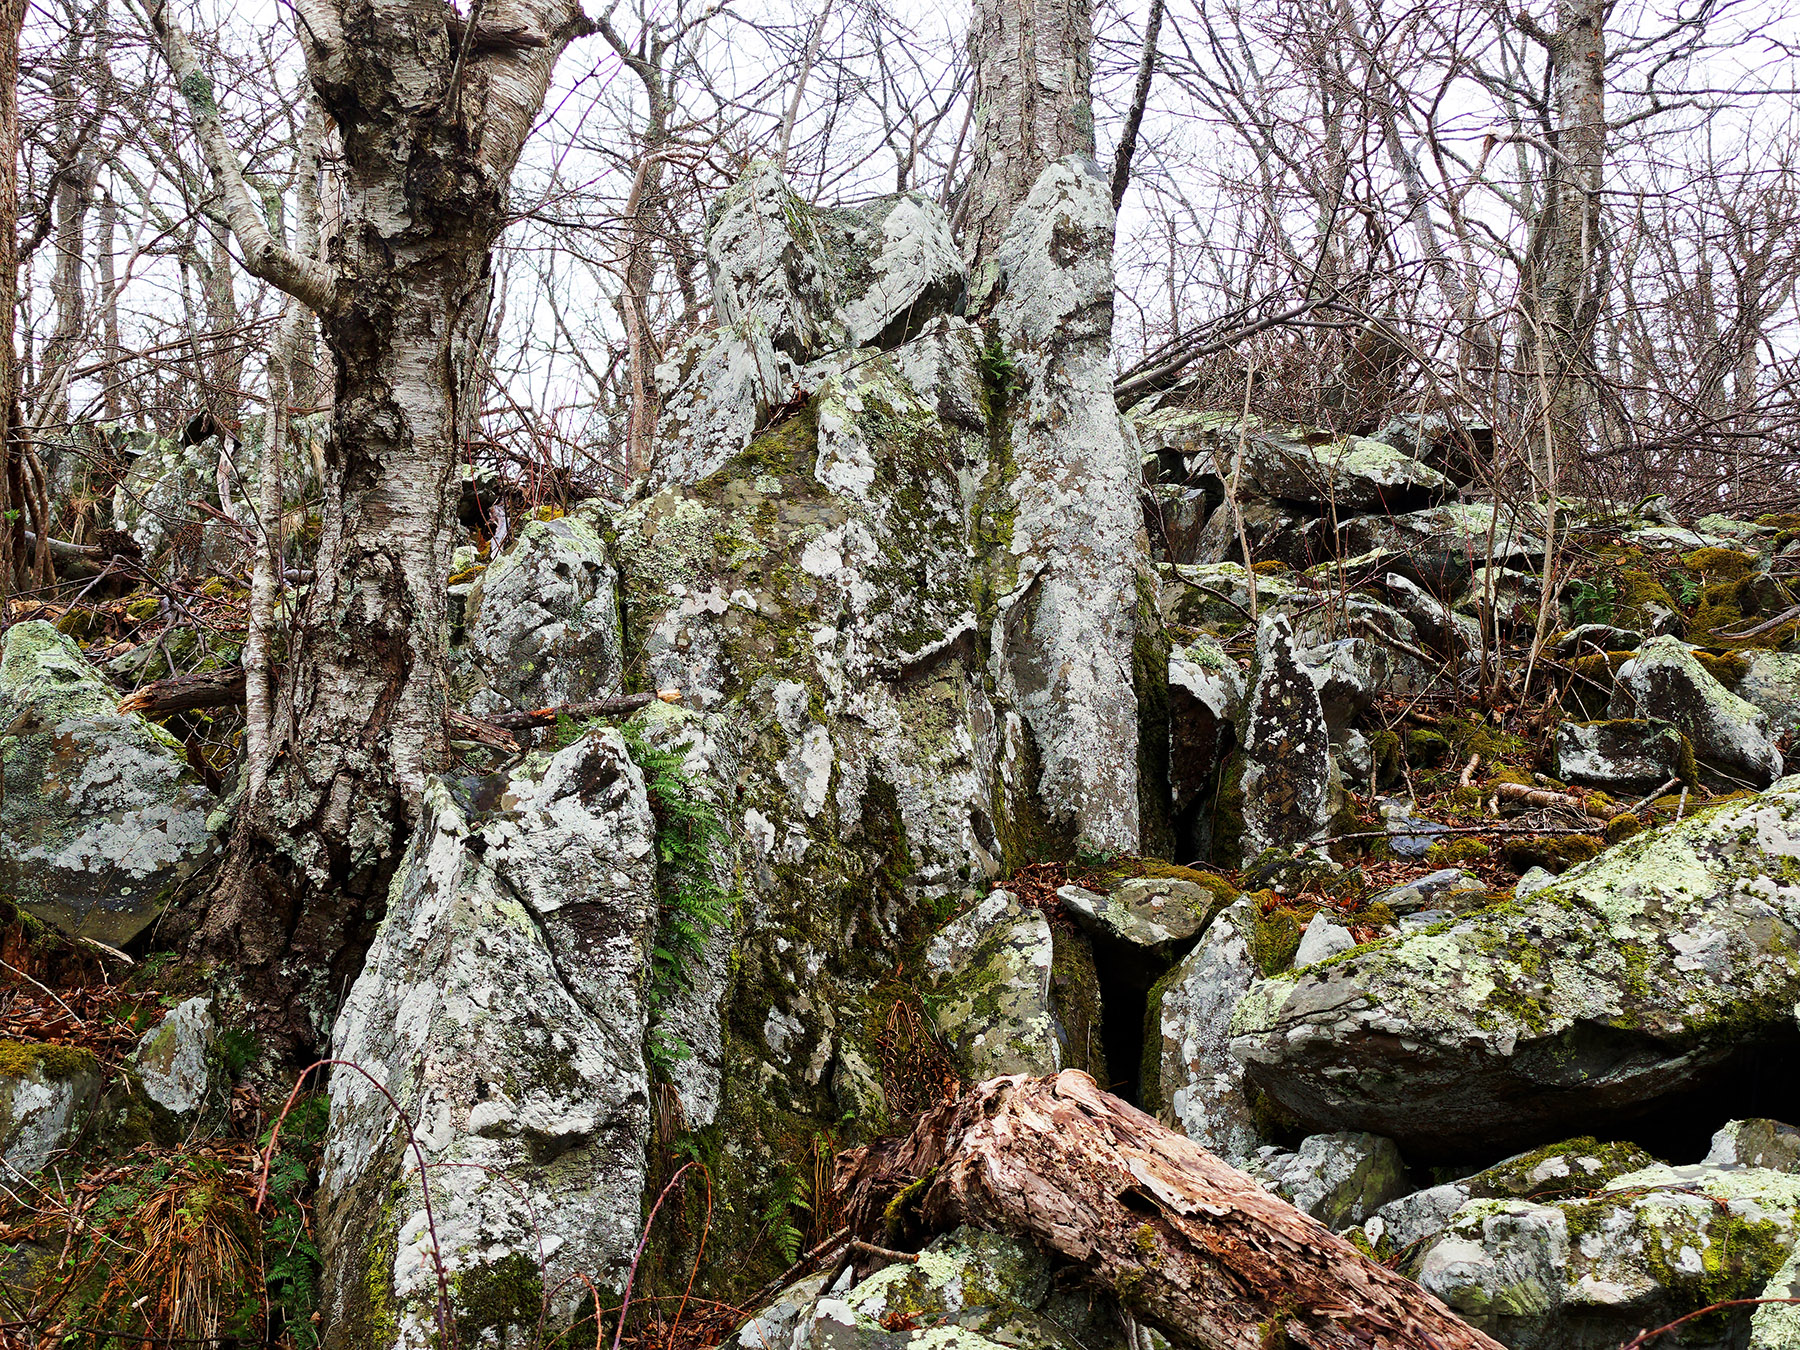 Severely weathered and eroded columns of metabasalt covered by lichen and fern and further fragmented by hardwood trees.  Trail above Little Stony Man Park area.